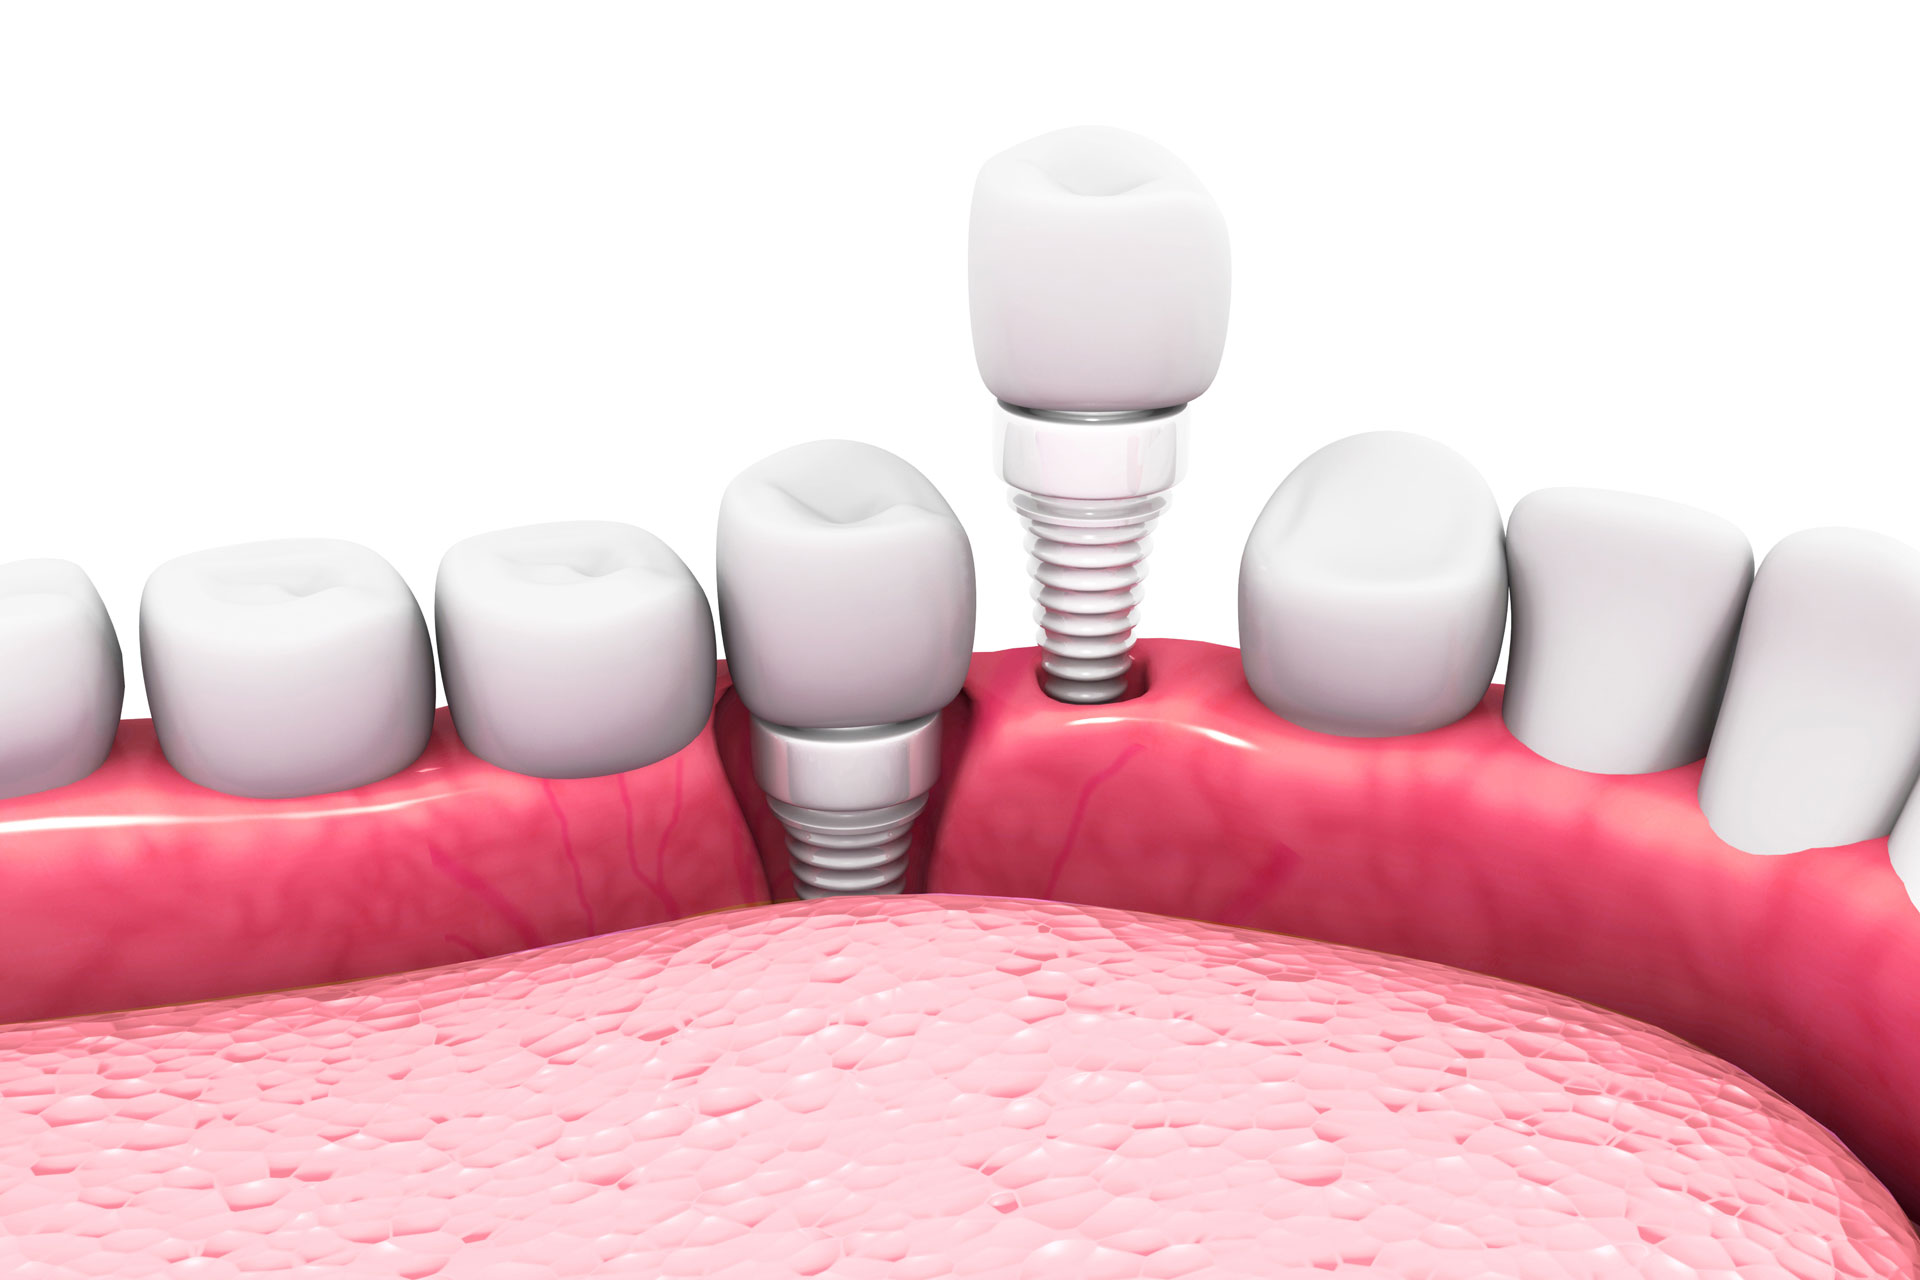 Are Ceramic Dental Implants Worth The Investment?